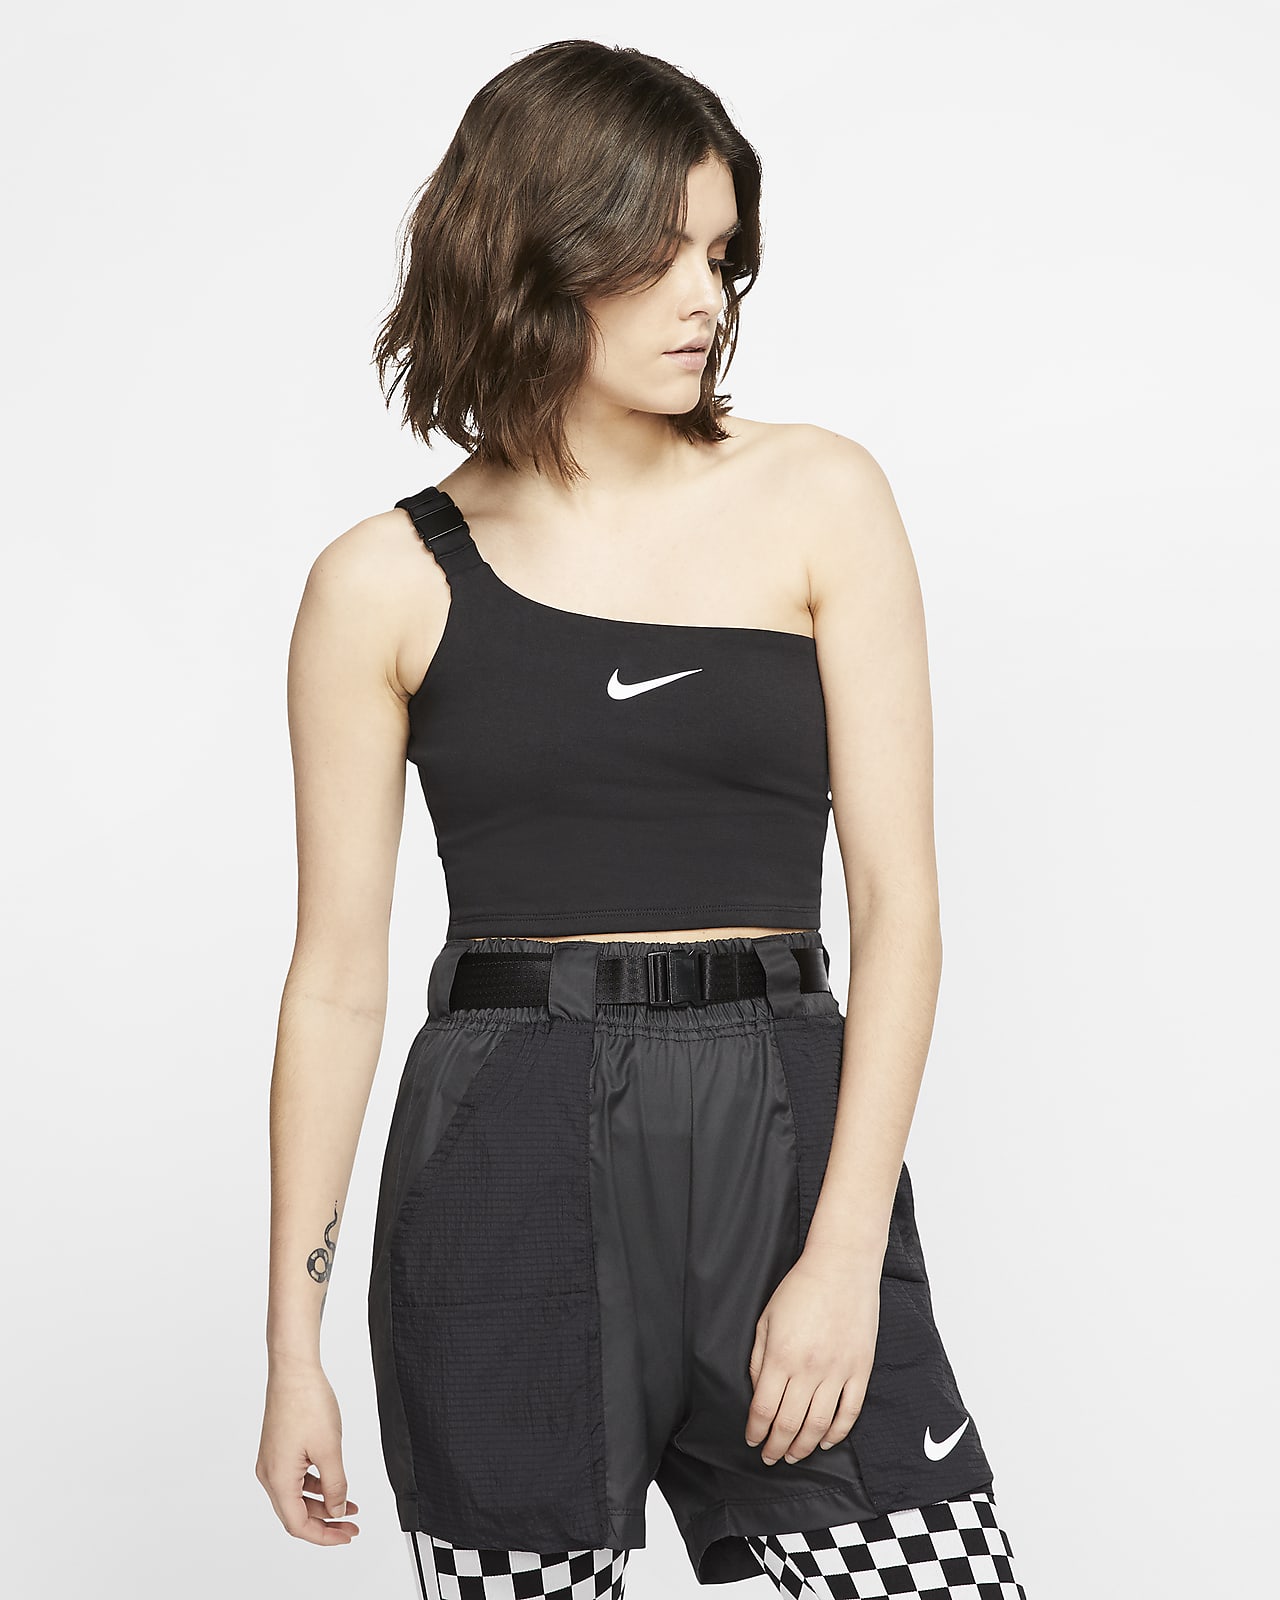 nike top and shorts set womens